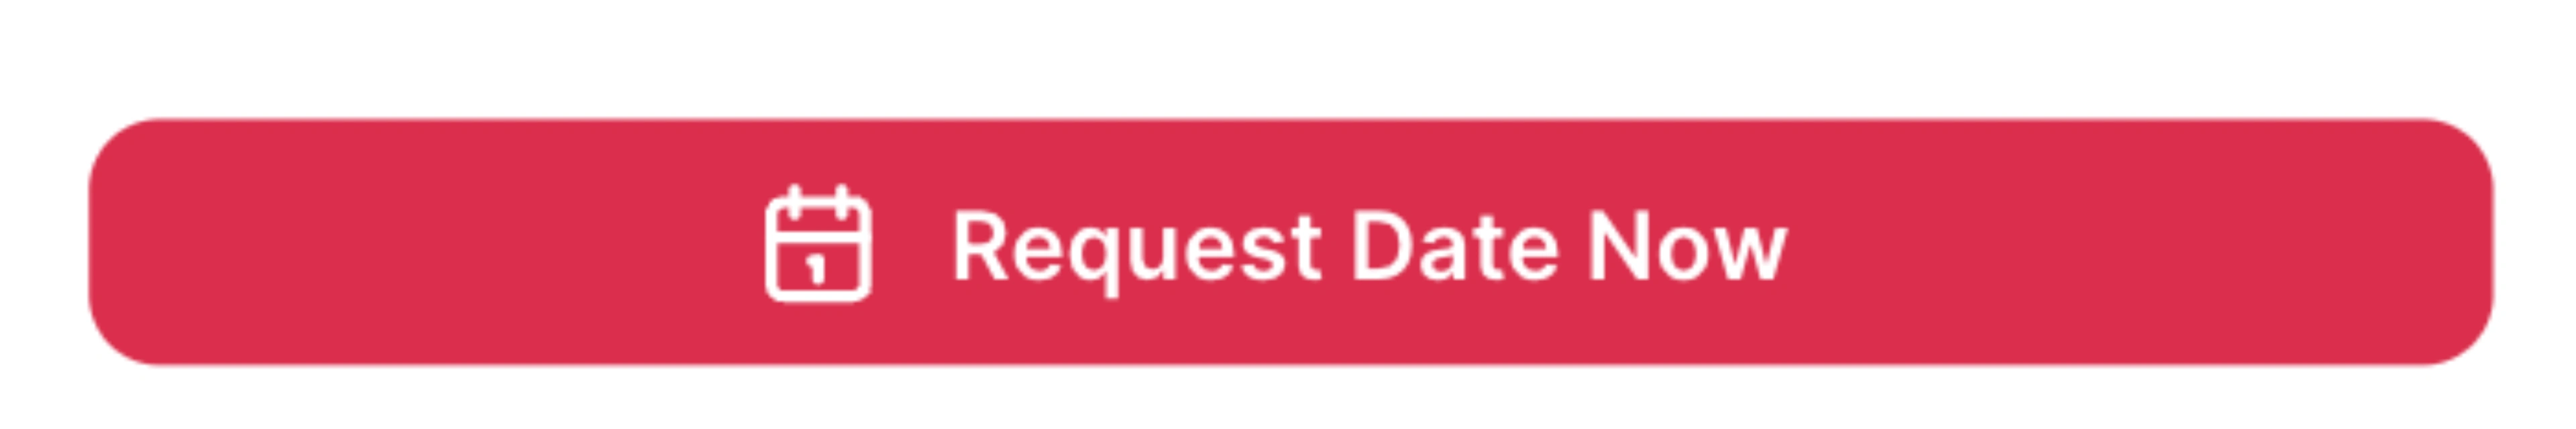 Request Date Now Button